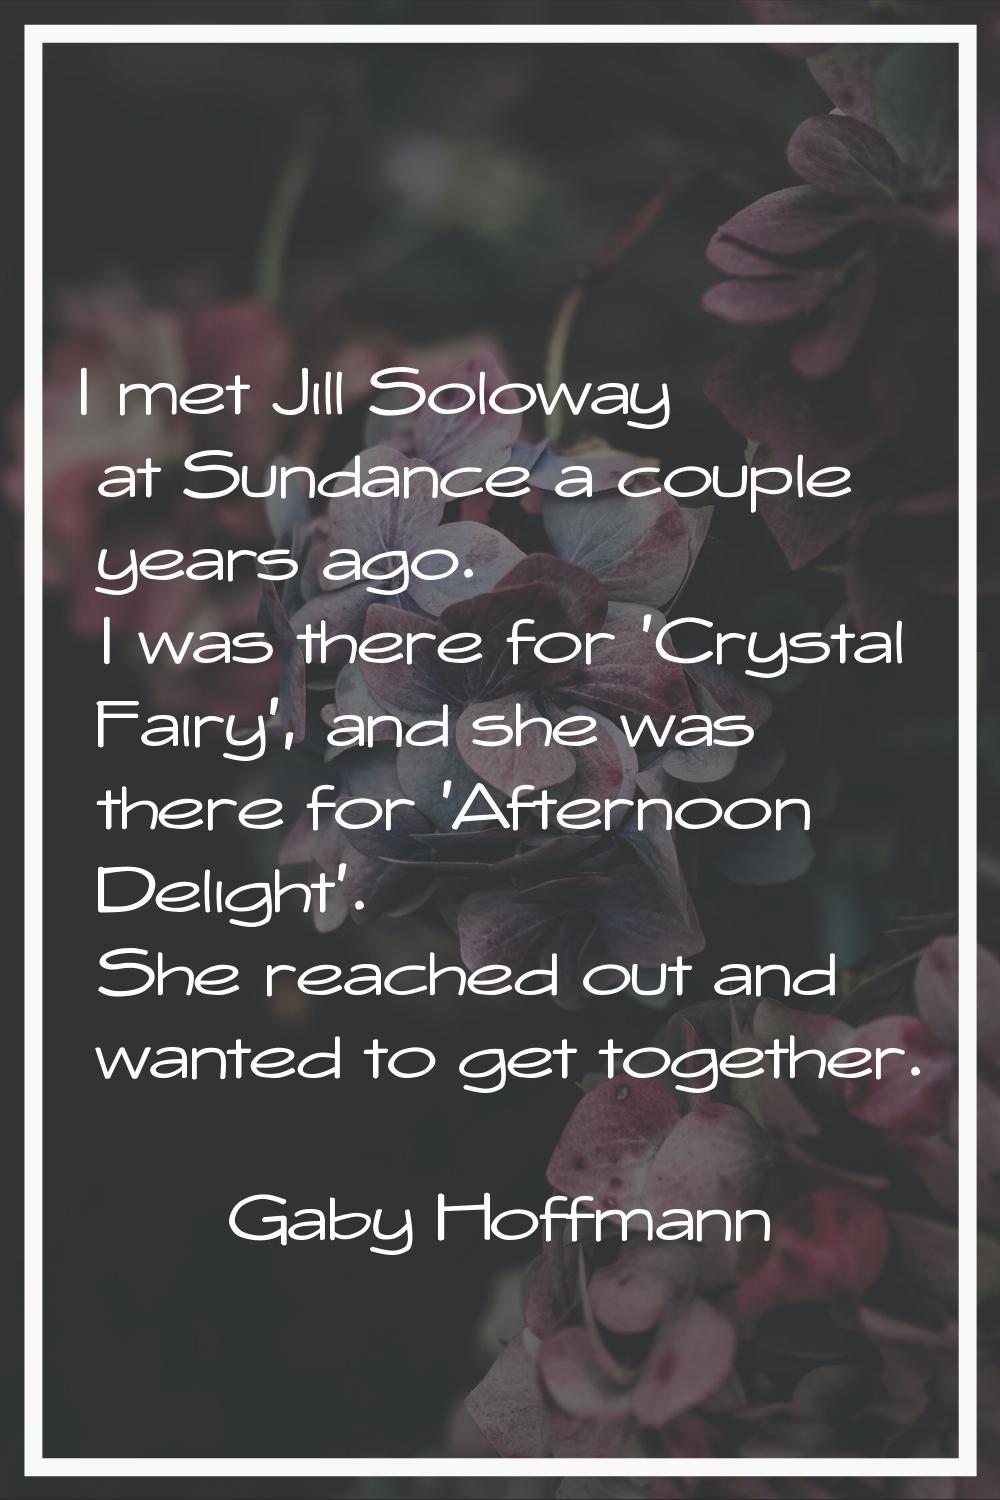 I met Jill Soloway at Sundance a couple years ago. I was there for 'Crystal Fairy', and she was the